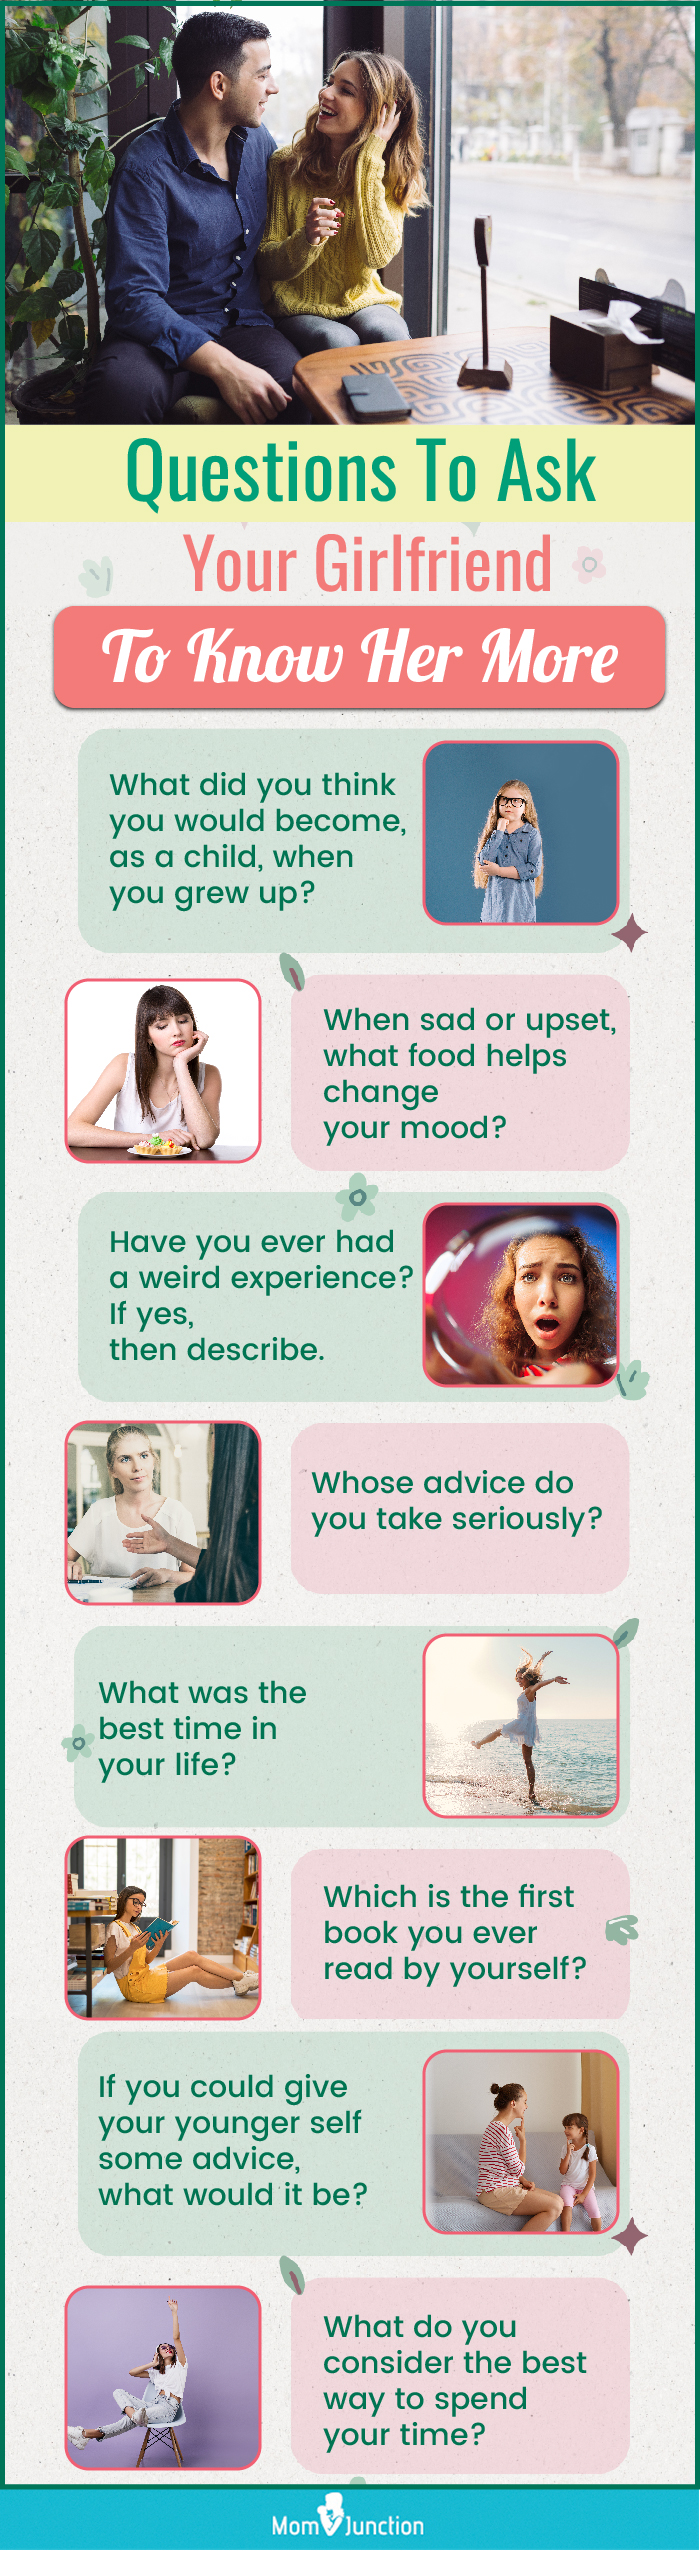 questions to ask your girlfriend to know her more (infographic)